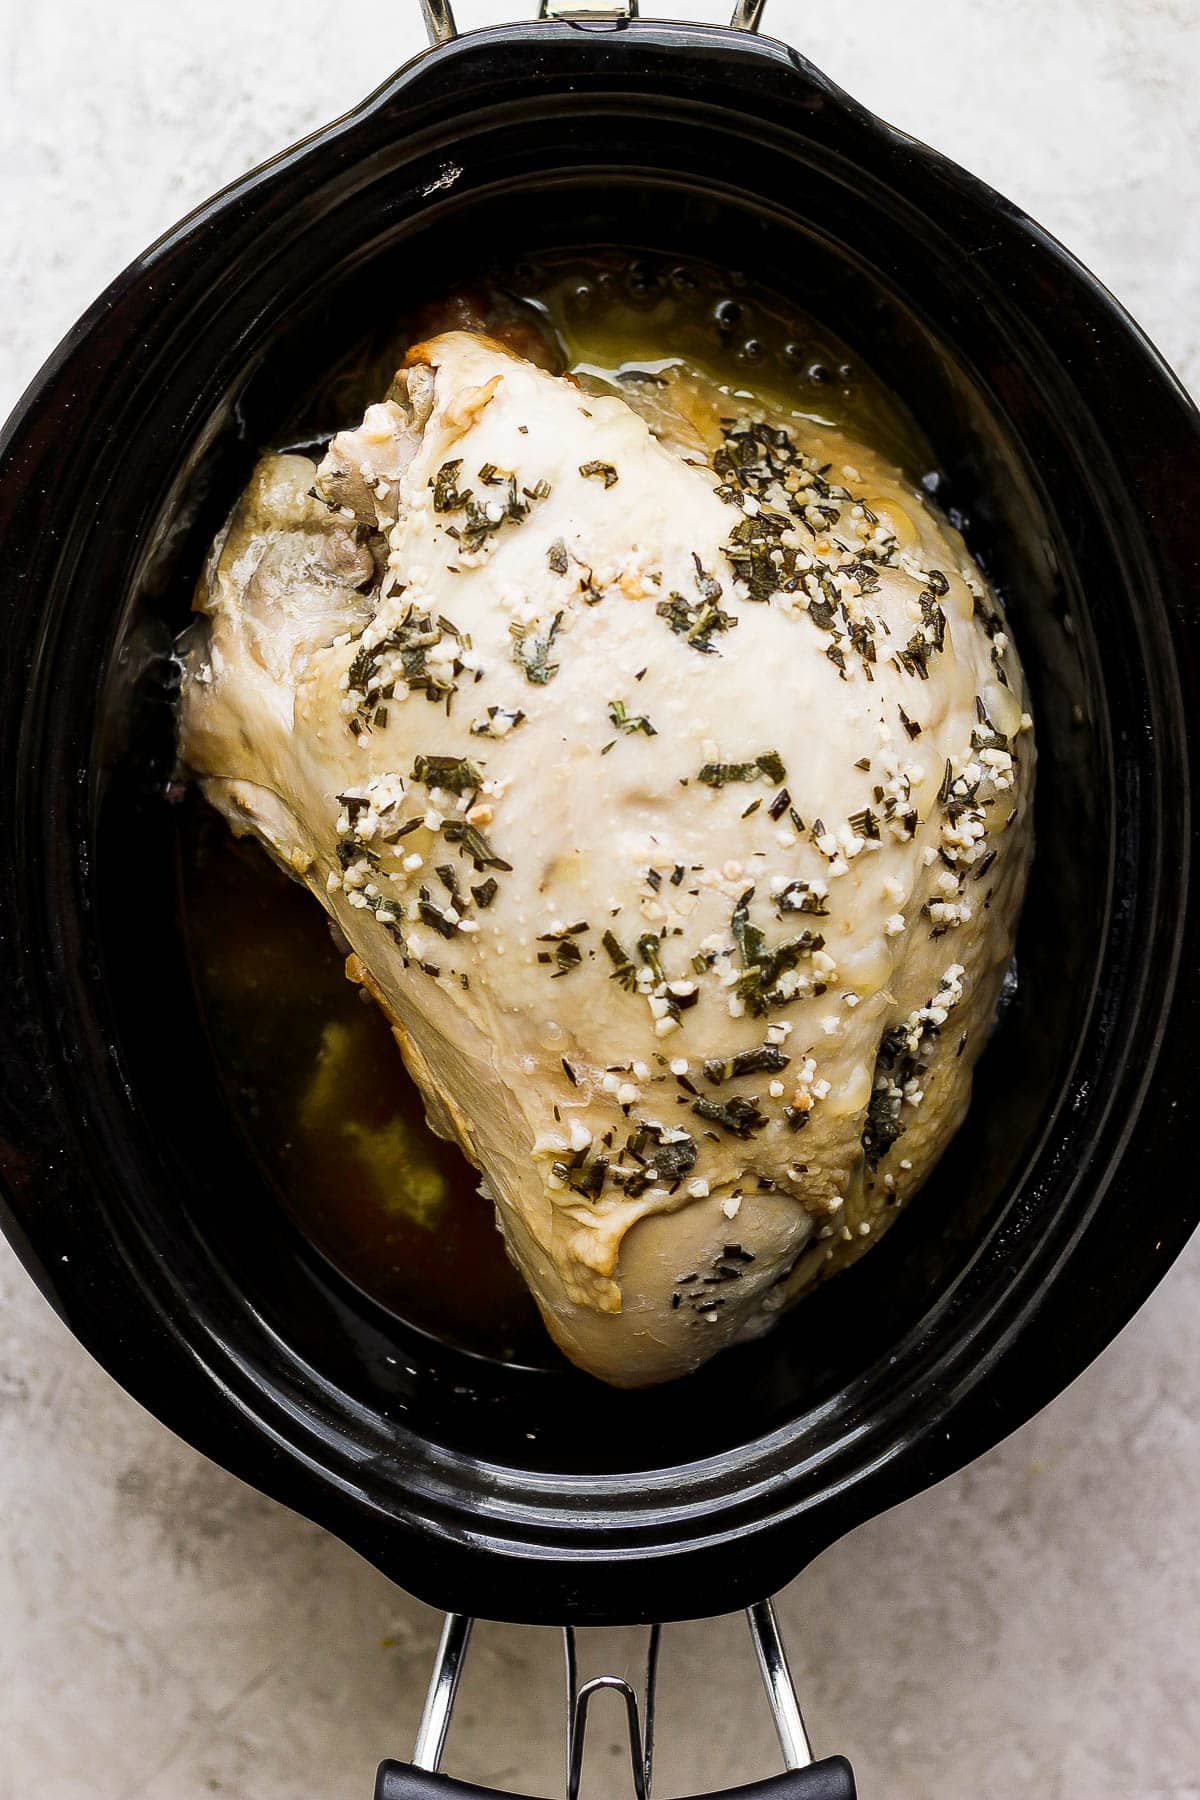 Turkey breast in the slow cooker after being cooked.